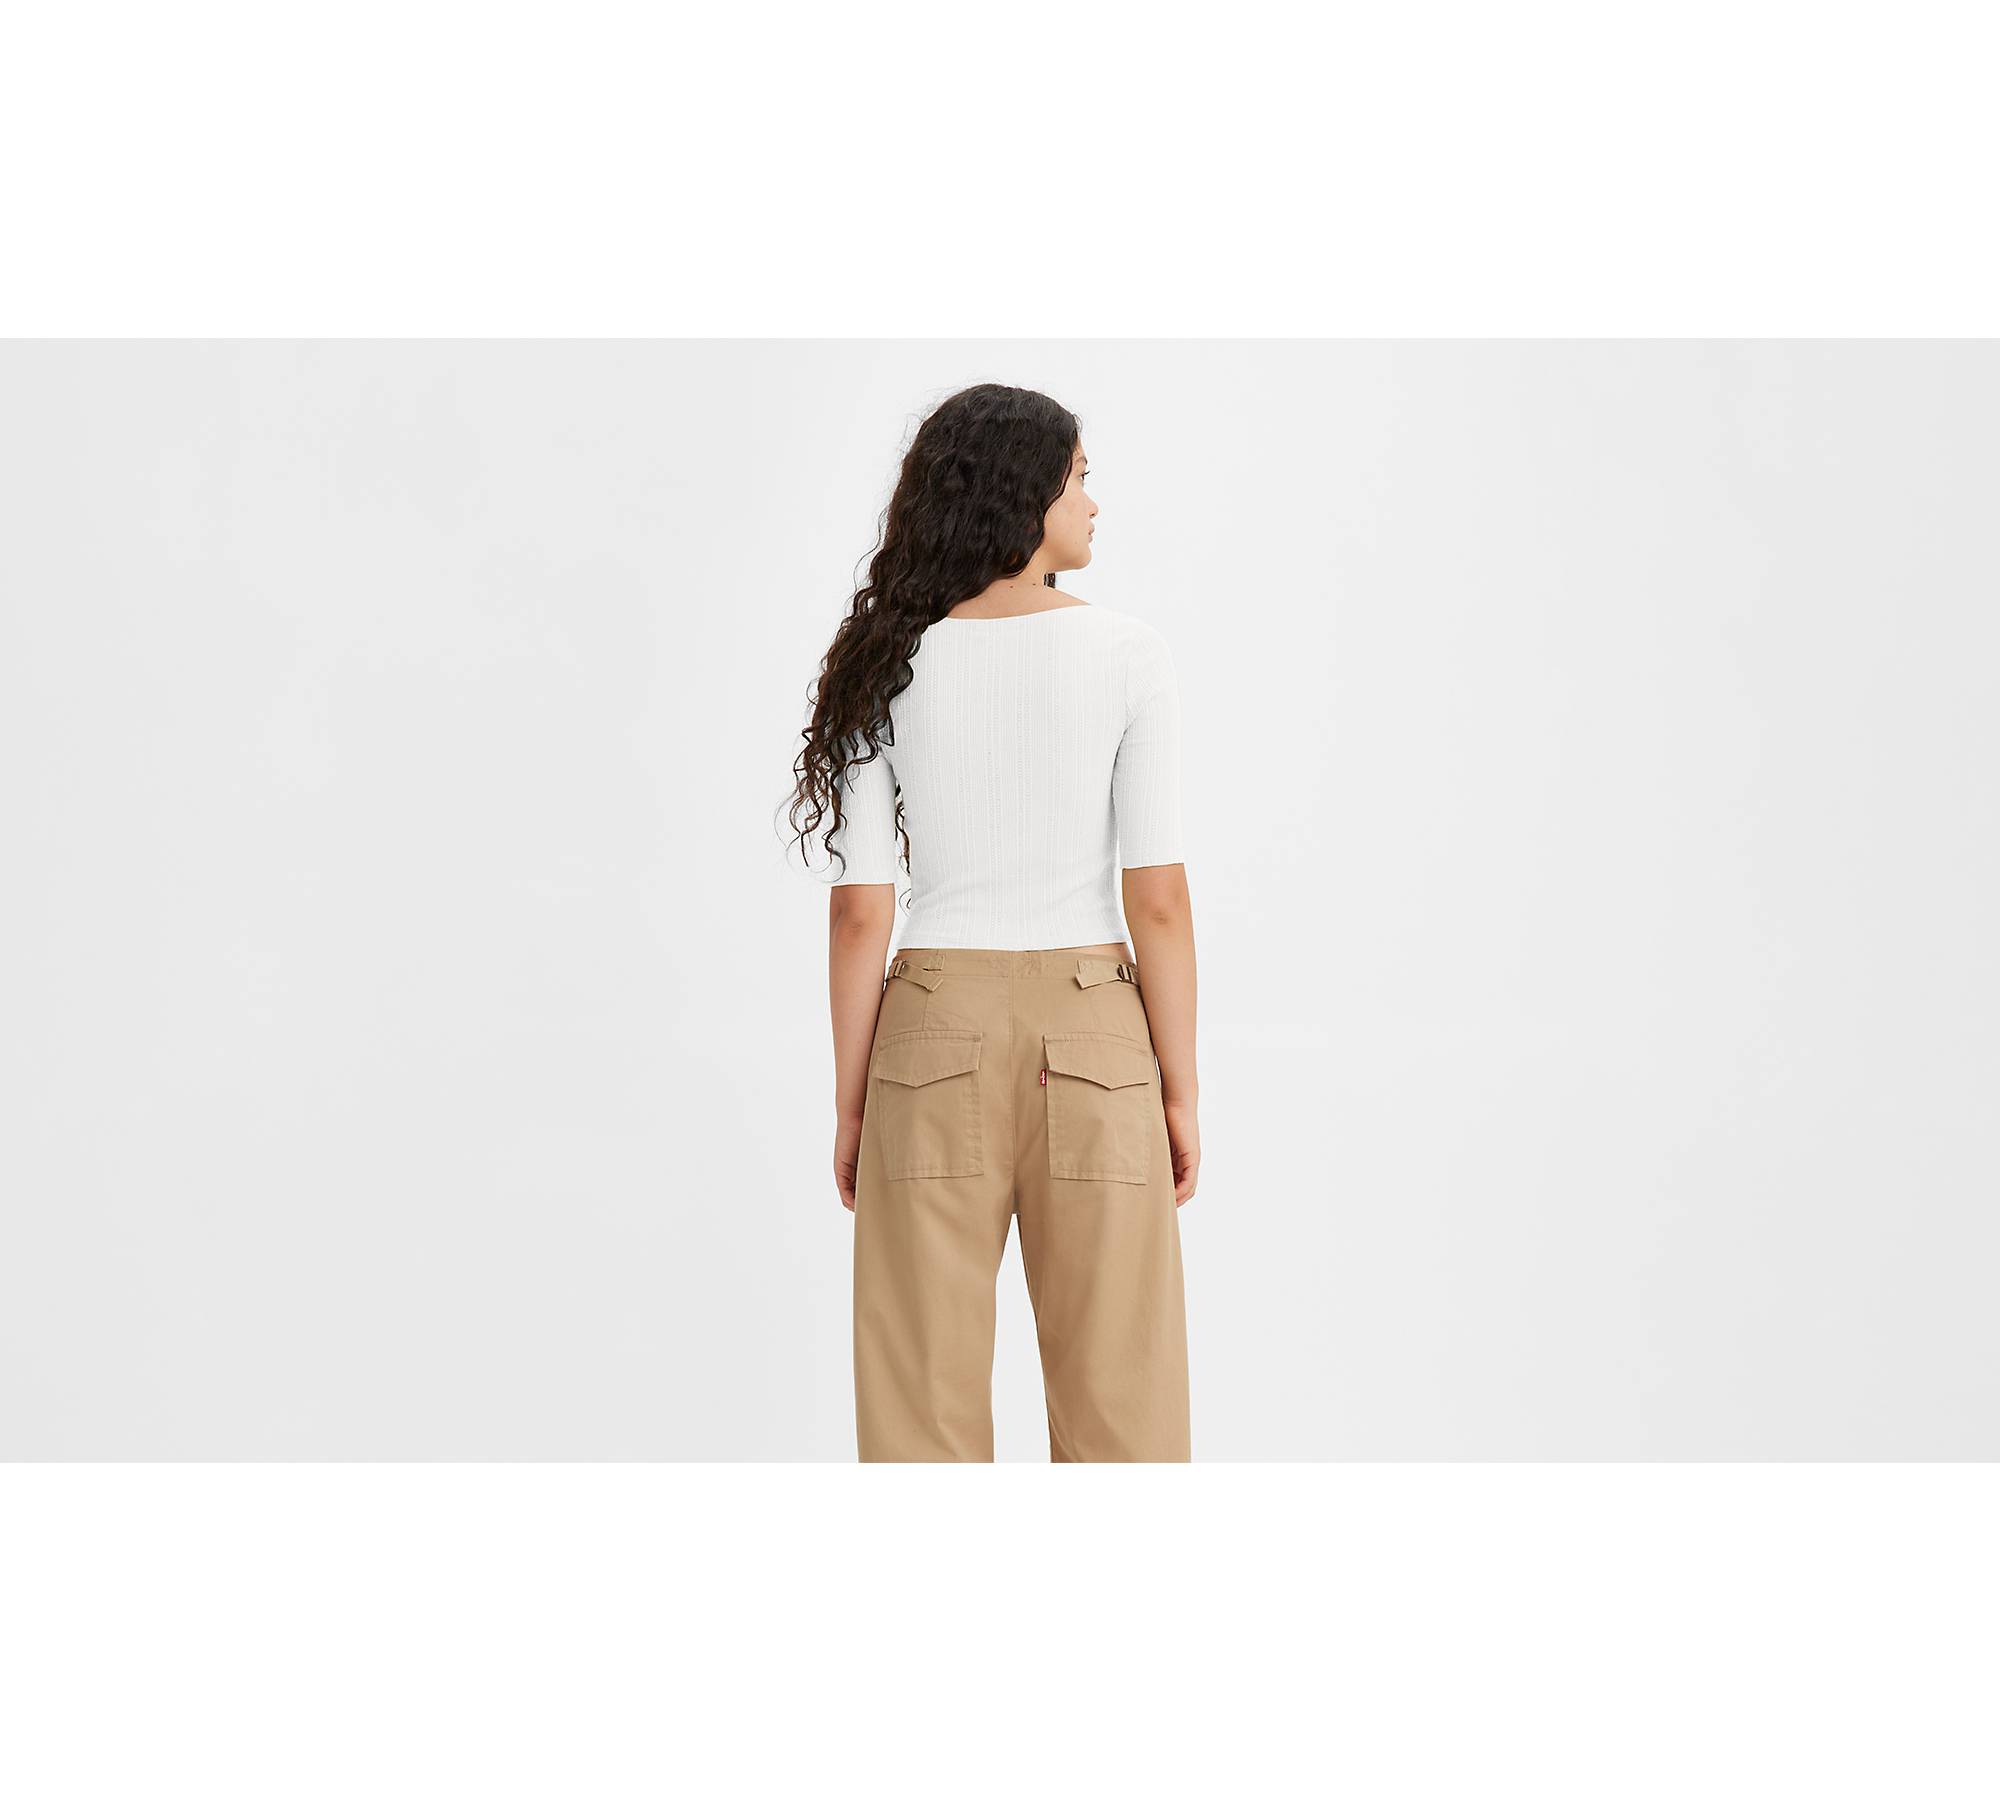 Monki Cargo Trousers Low Waist Loose Fit Cotton Pink